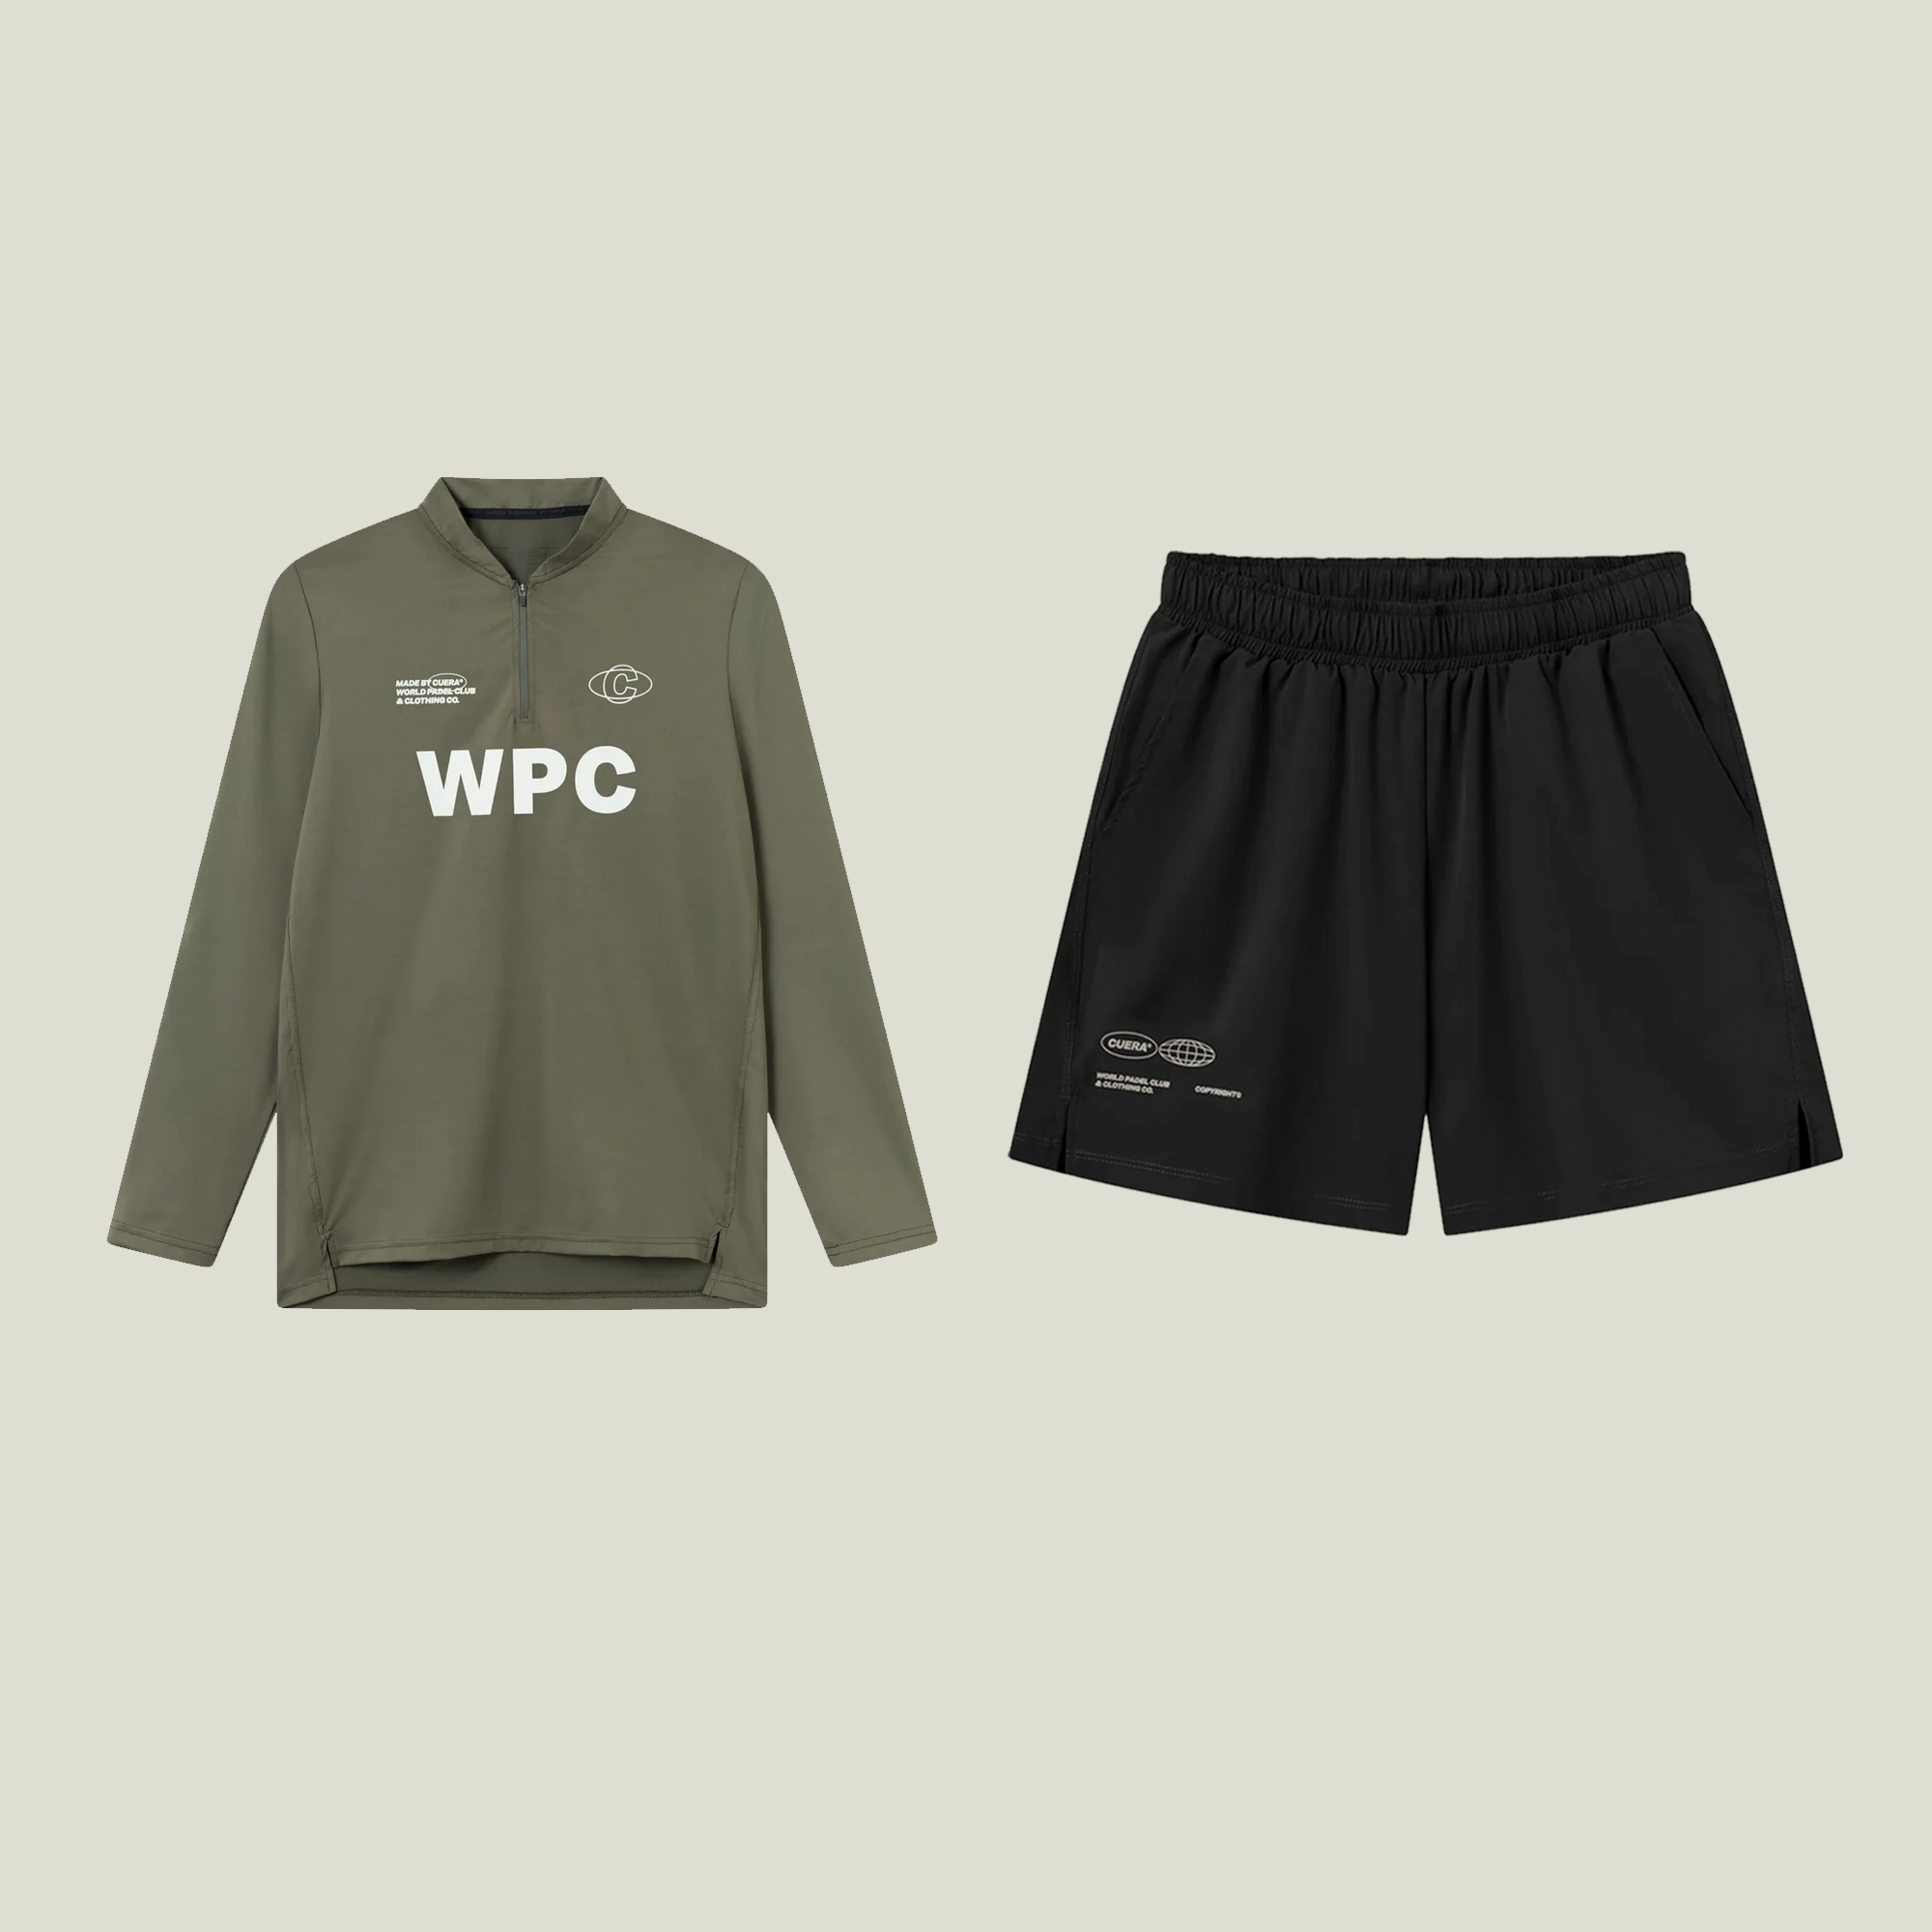 Oncourt Shorts & LS - Black & Army Combo